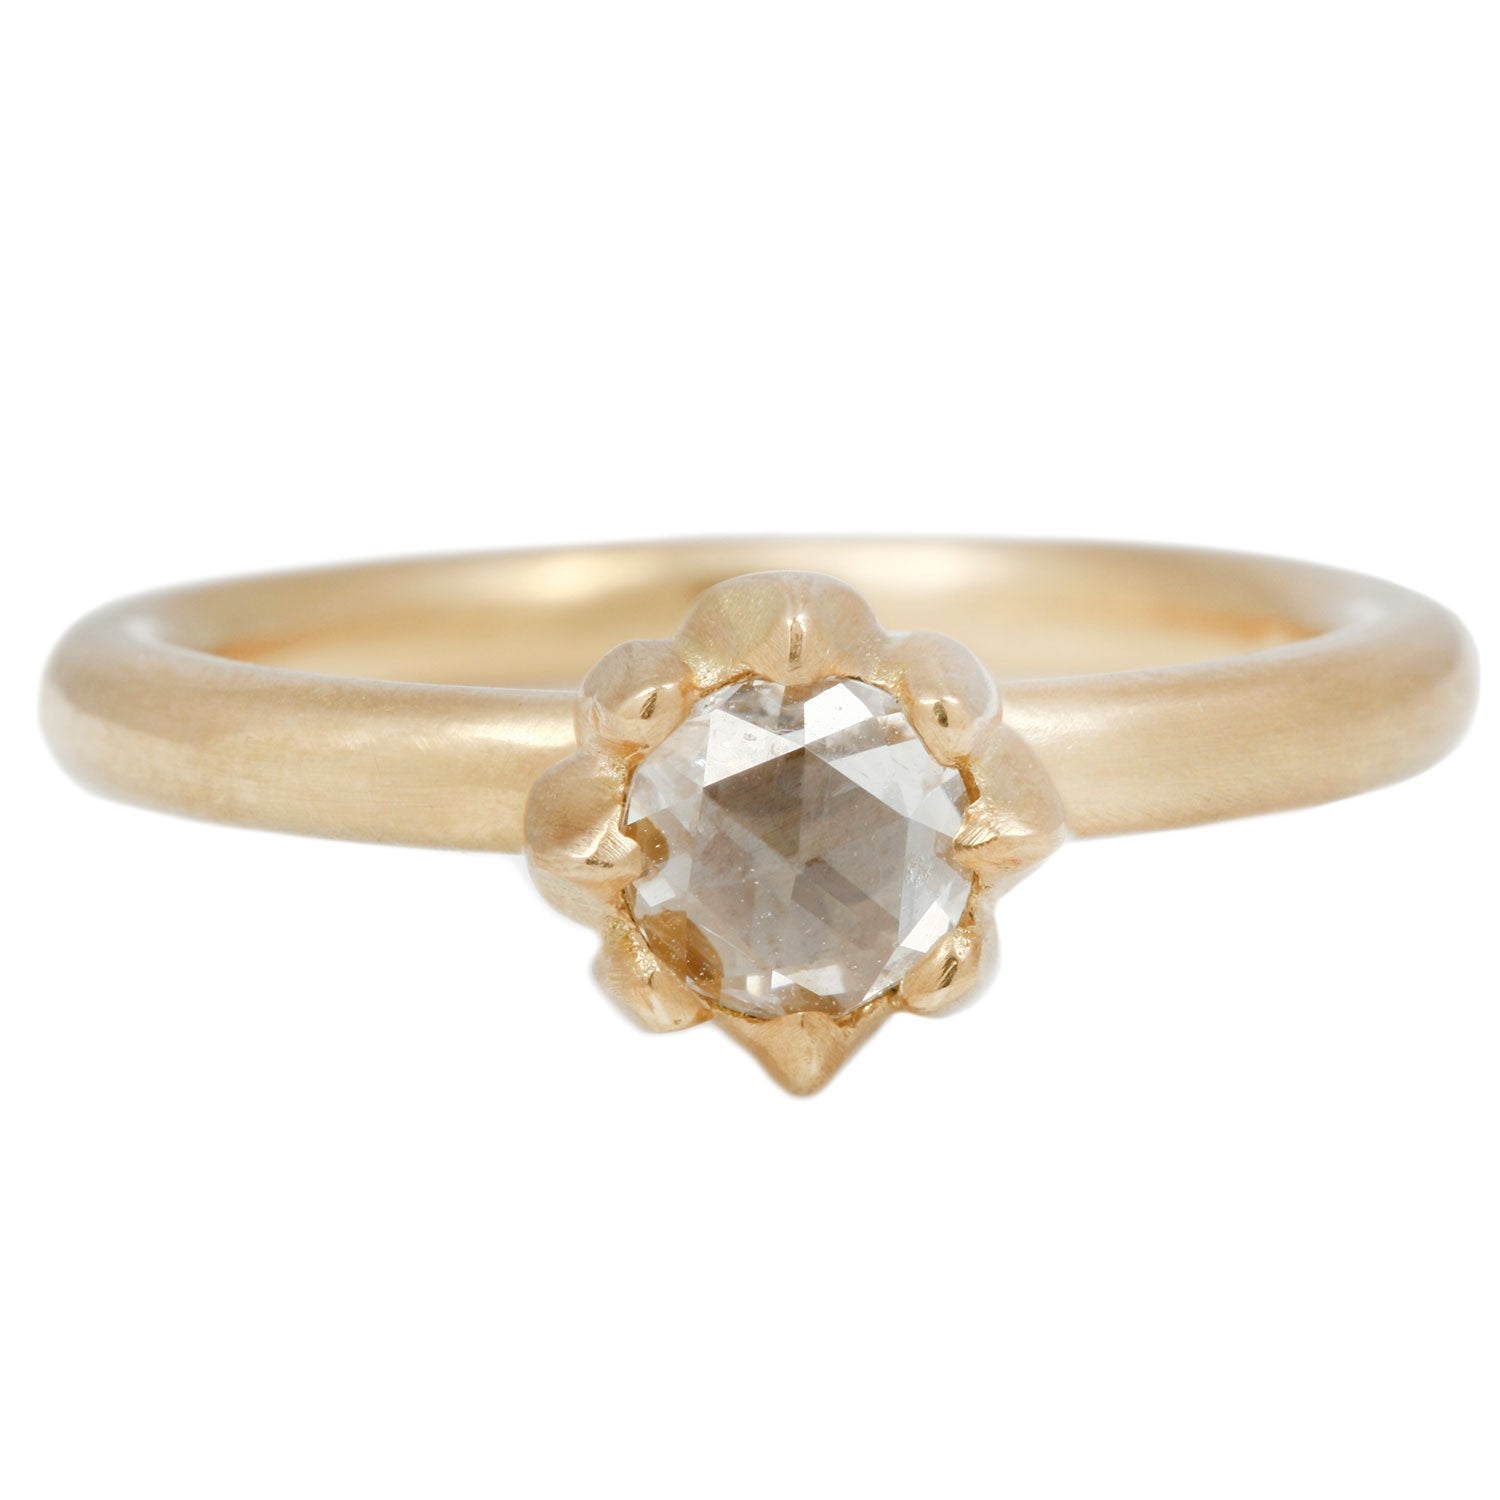 The Solstice Round Ring - Sarah O.